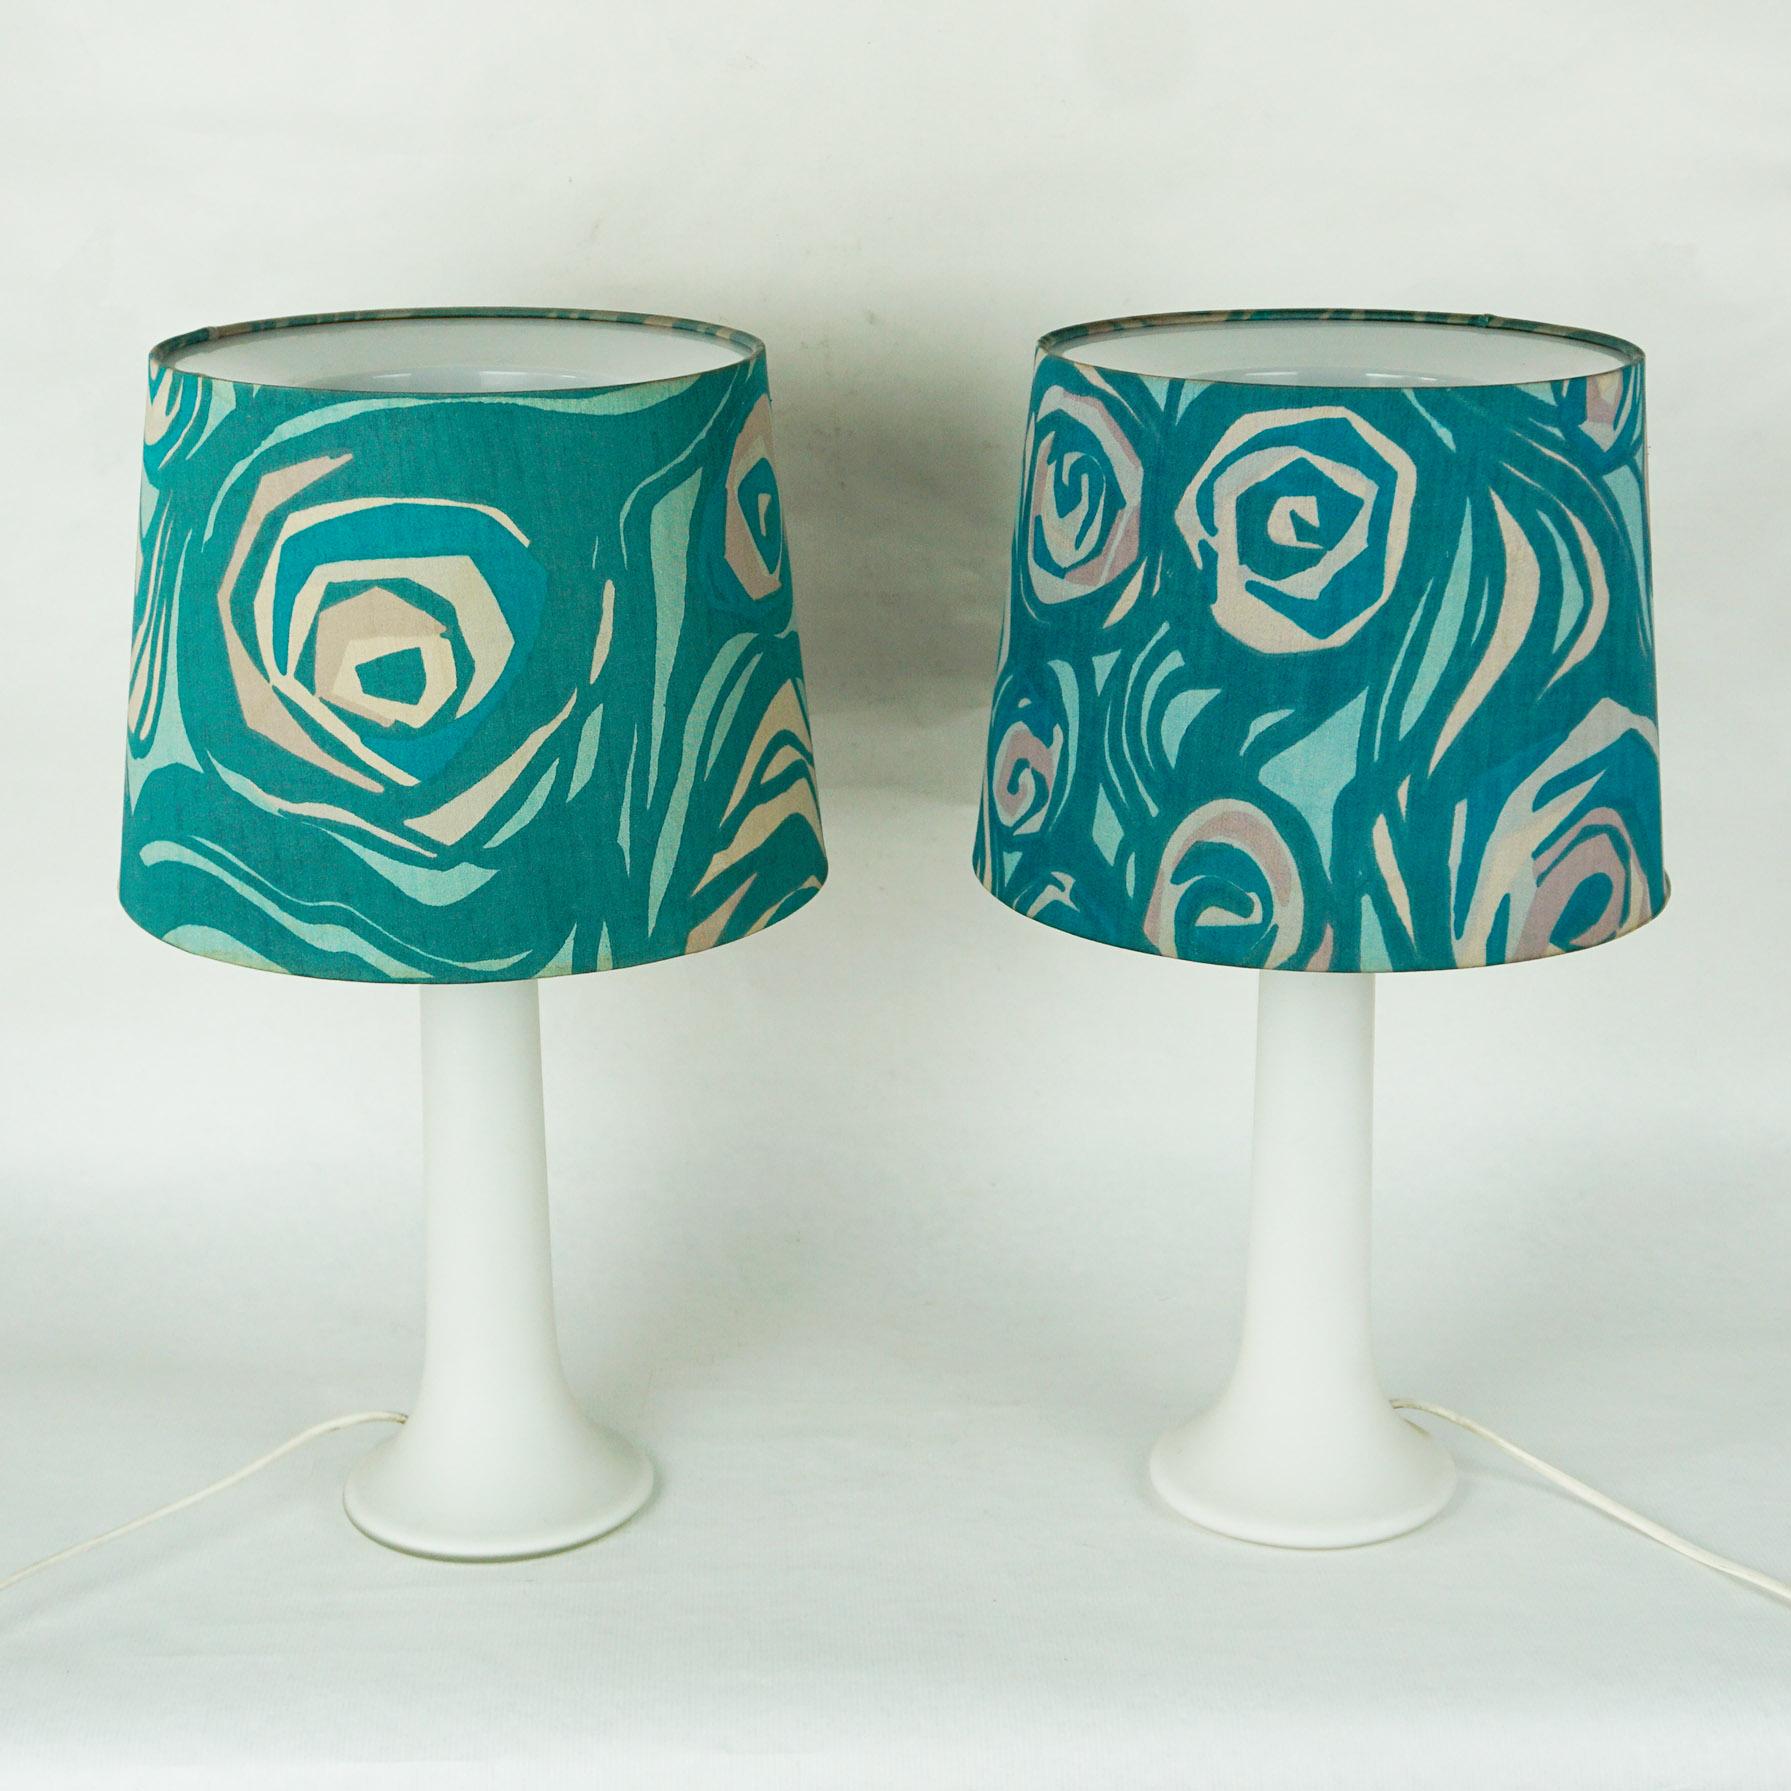 Very rare pair of 1960s glass table lamps with original blue floral fabric lampshades by Luxus Vittsjö, made in Sweden, designed by Uno and Osten Kristiansson. Beautiful high quality Scandinavian design. The bases are made of thick overlay white